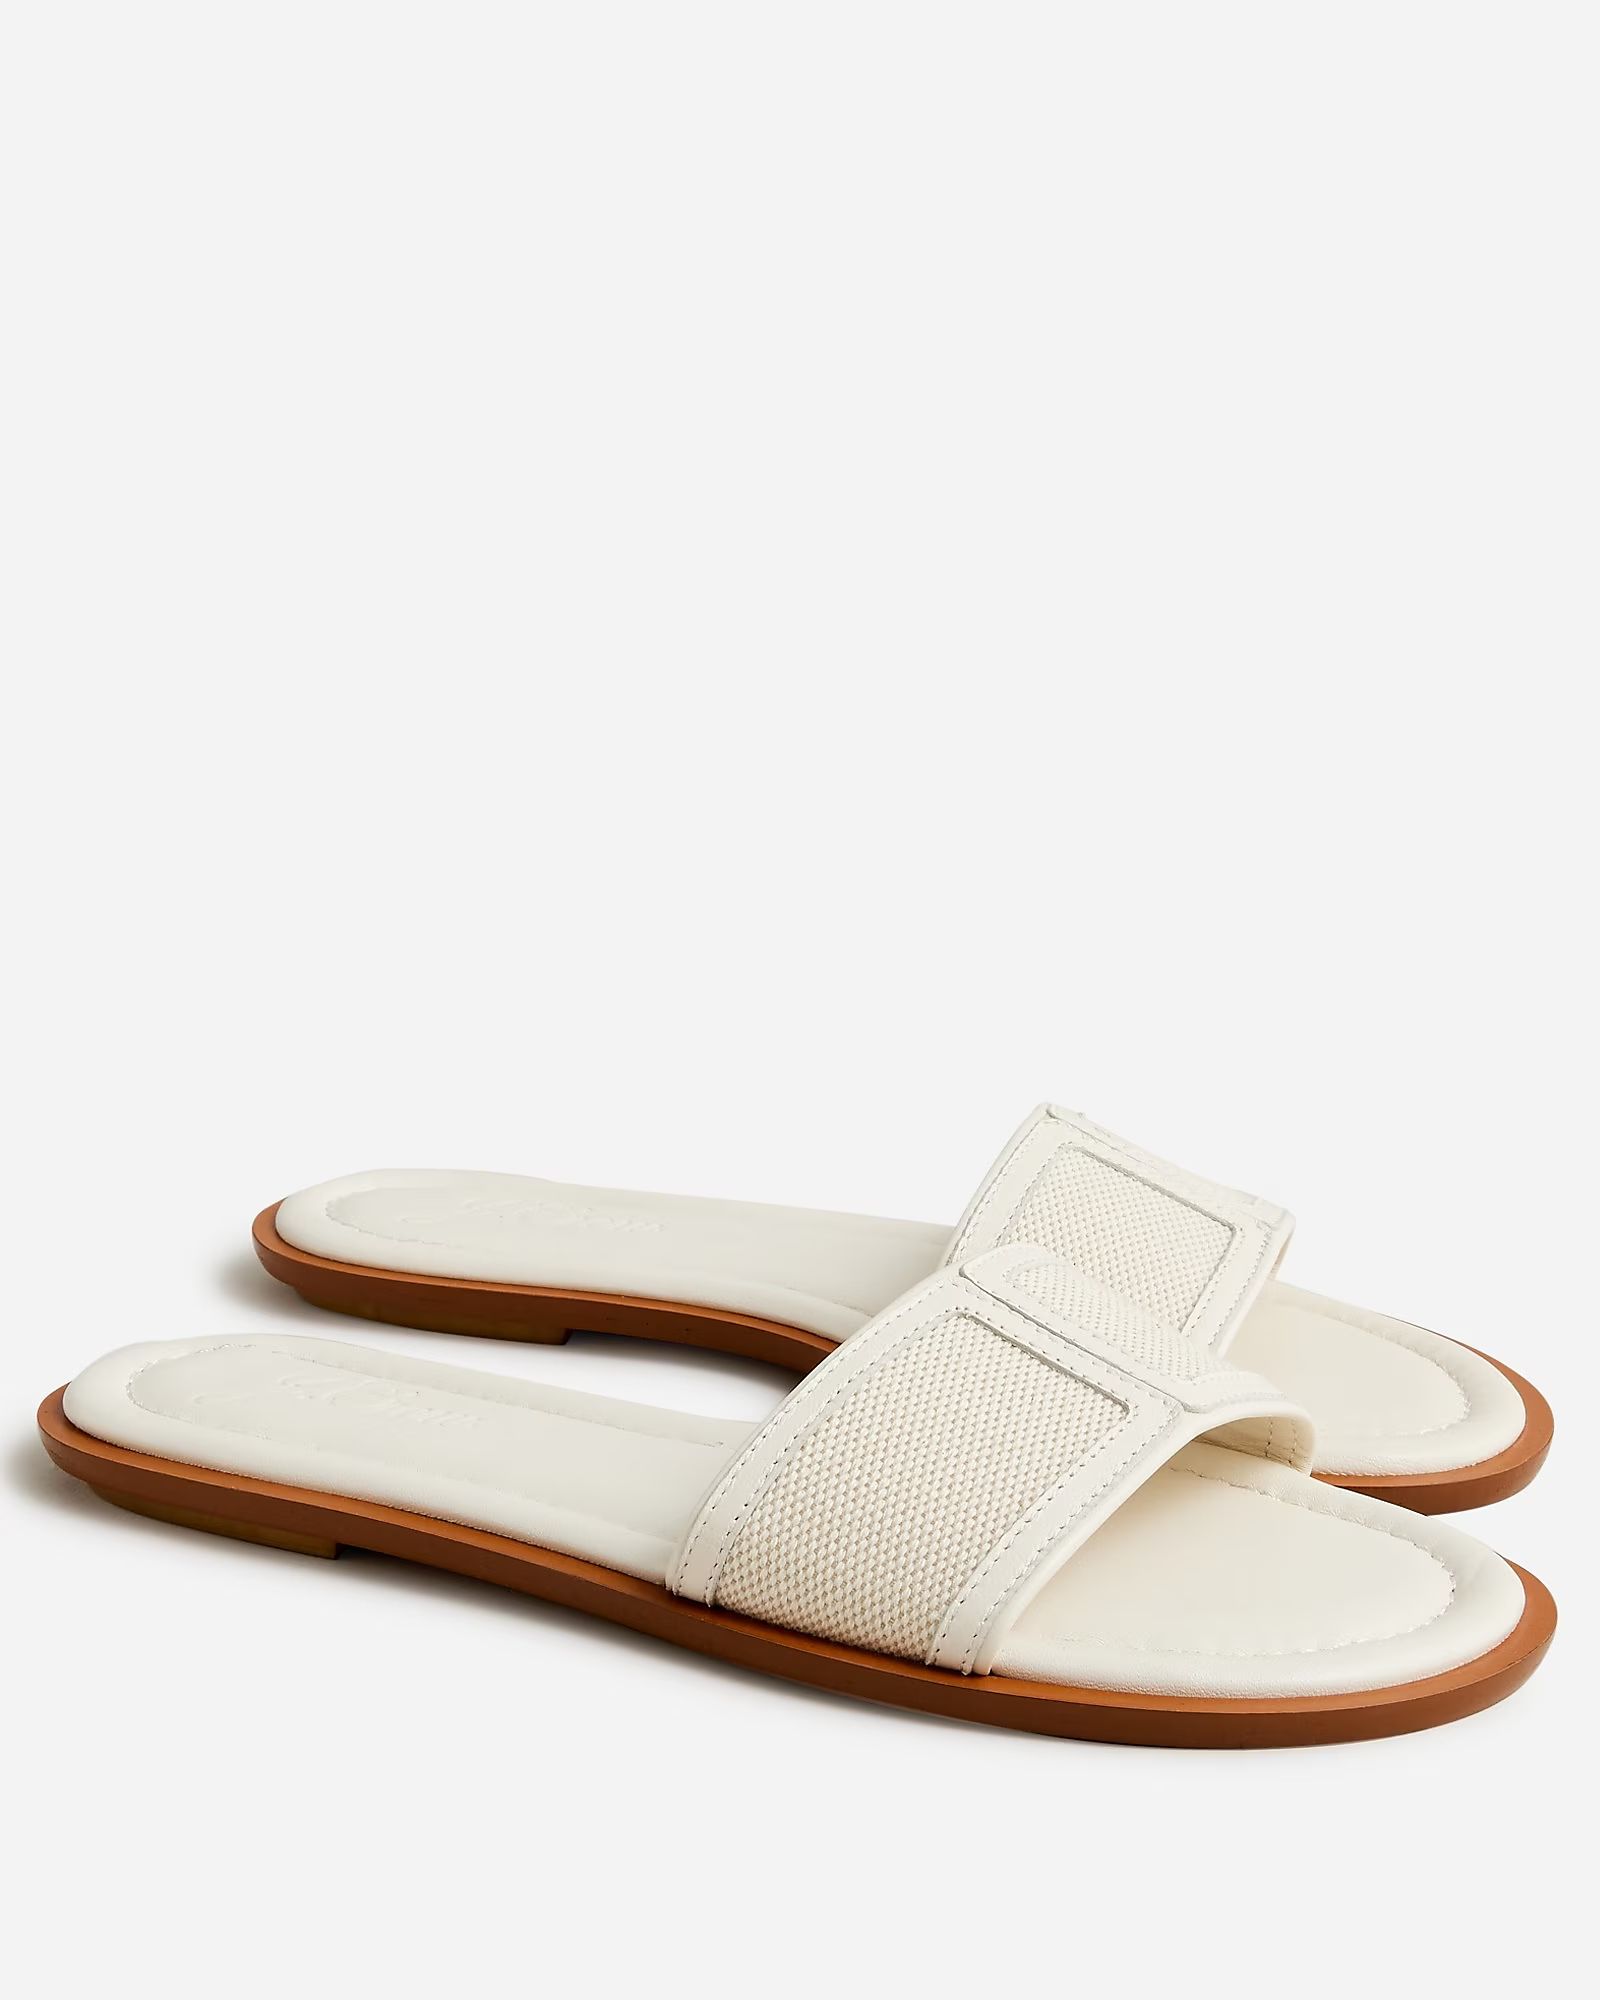 Slide sandals in canvas and leather | J.Crew US